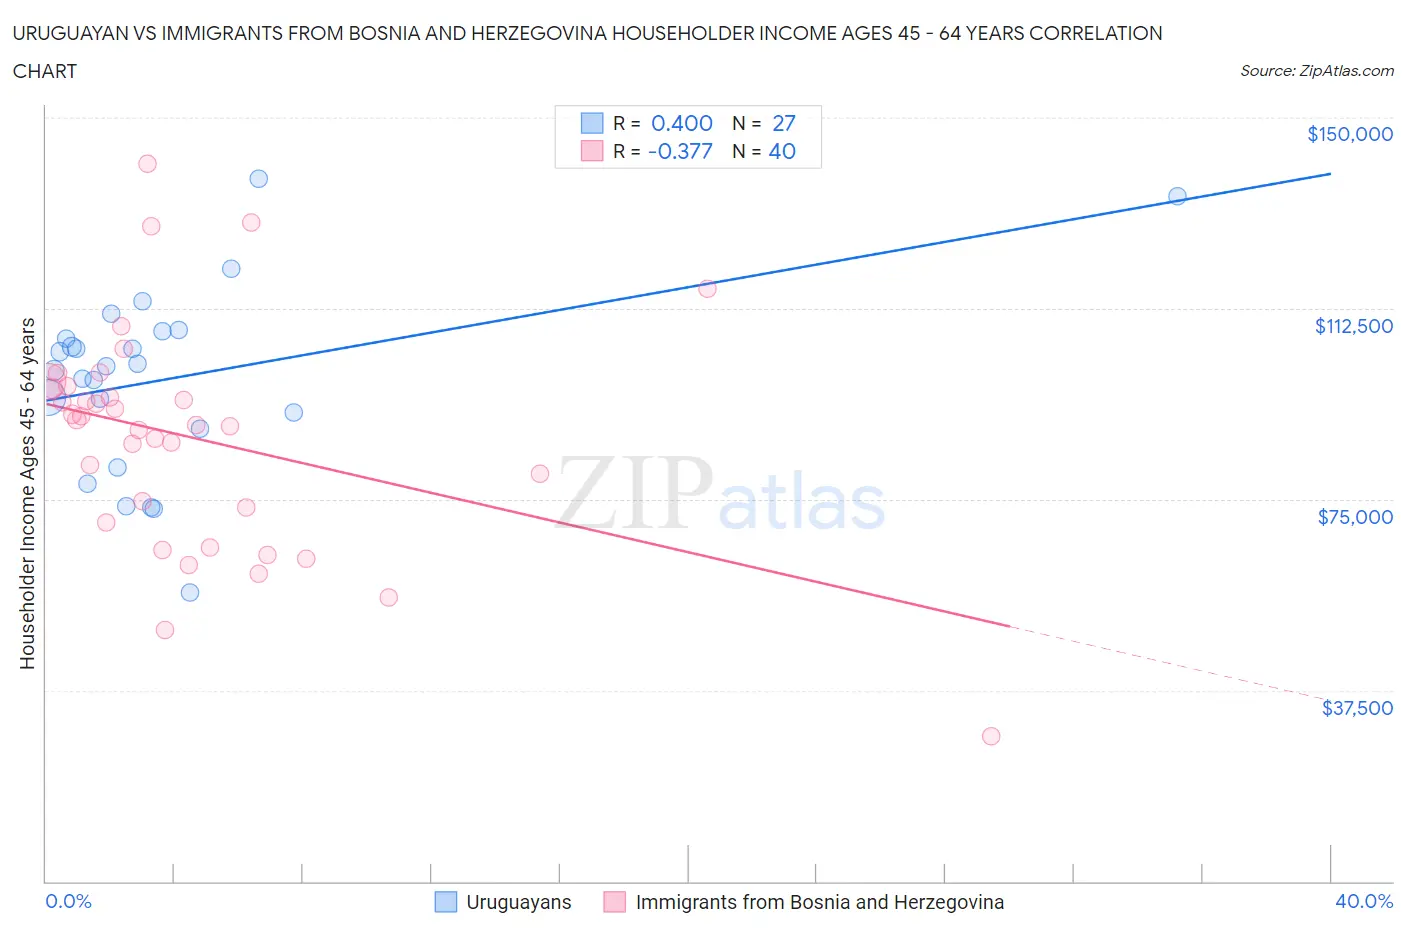 Uruguayan vs Immigrants from Bosnia and Herzegovina Householder Income Ages 45 - 64 years